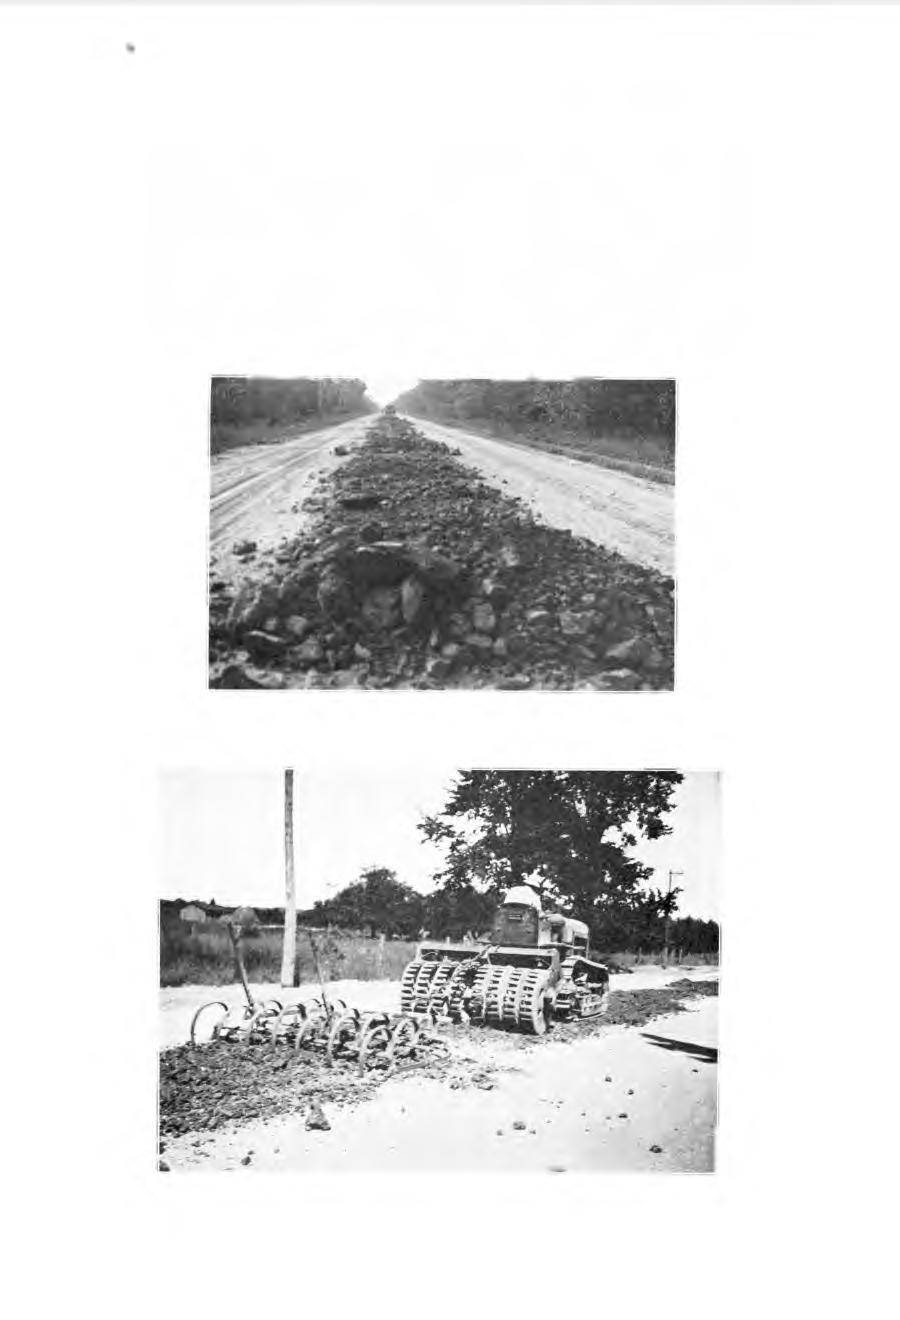 trucks. Figure 1 shows the digging of clay for the Acme- Kalkaska County line job.